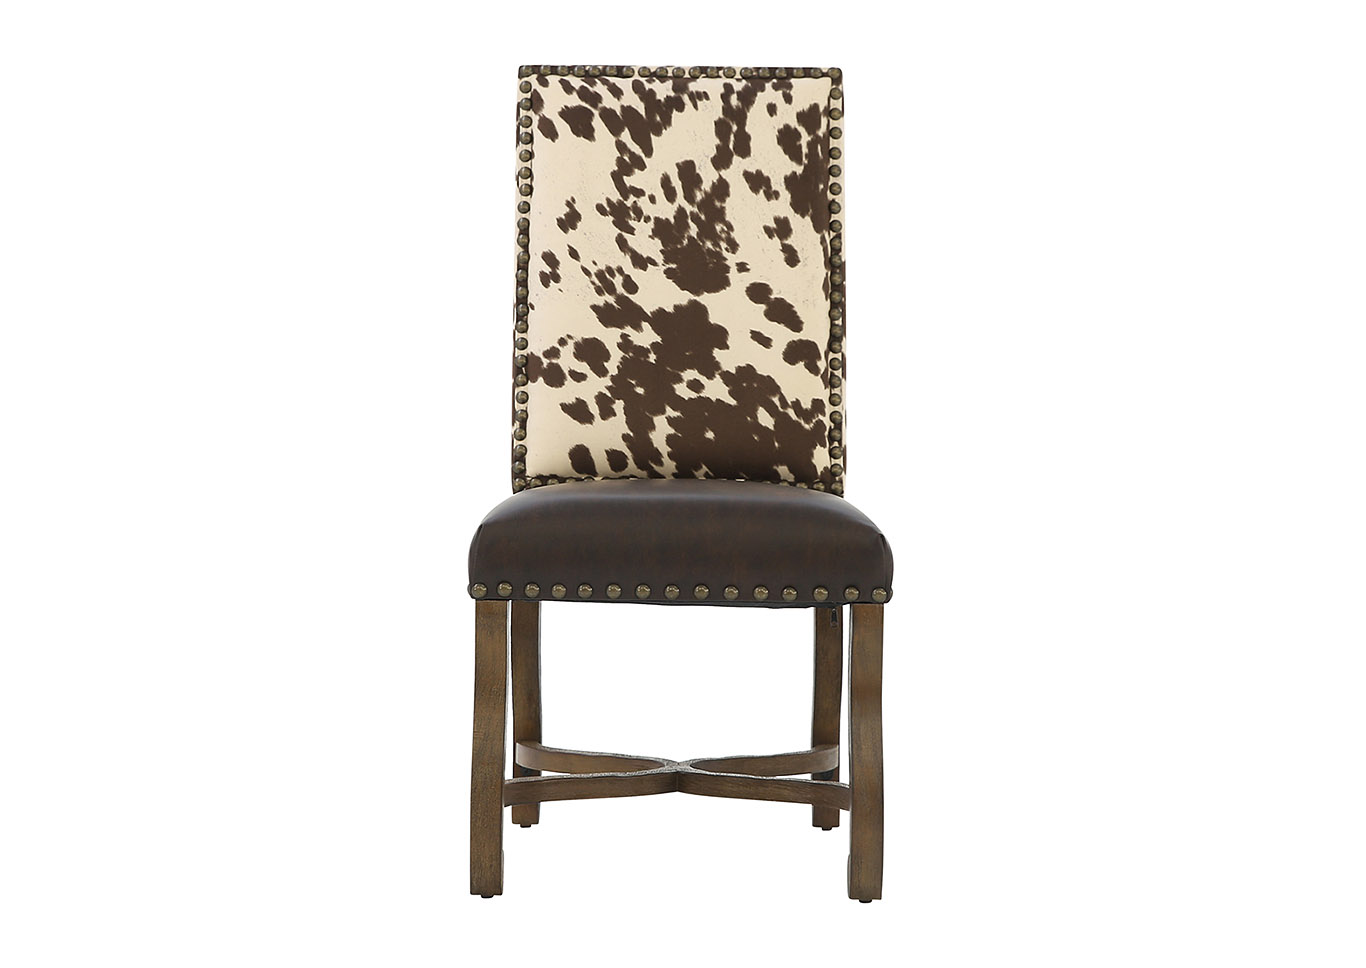 MESQUITE RANCH LEATHER/FAUX COWHIDE SIDE CHAIR